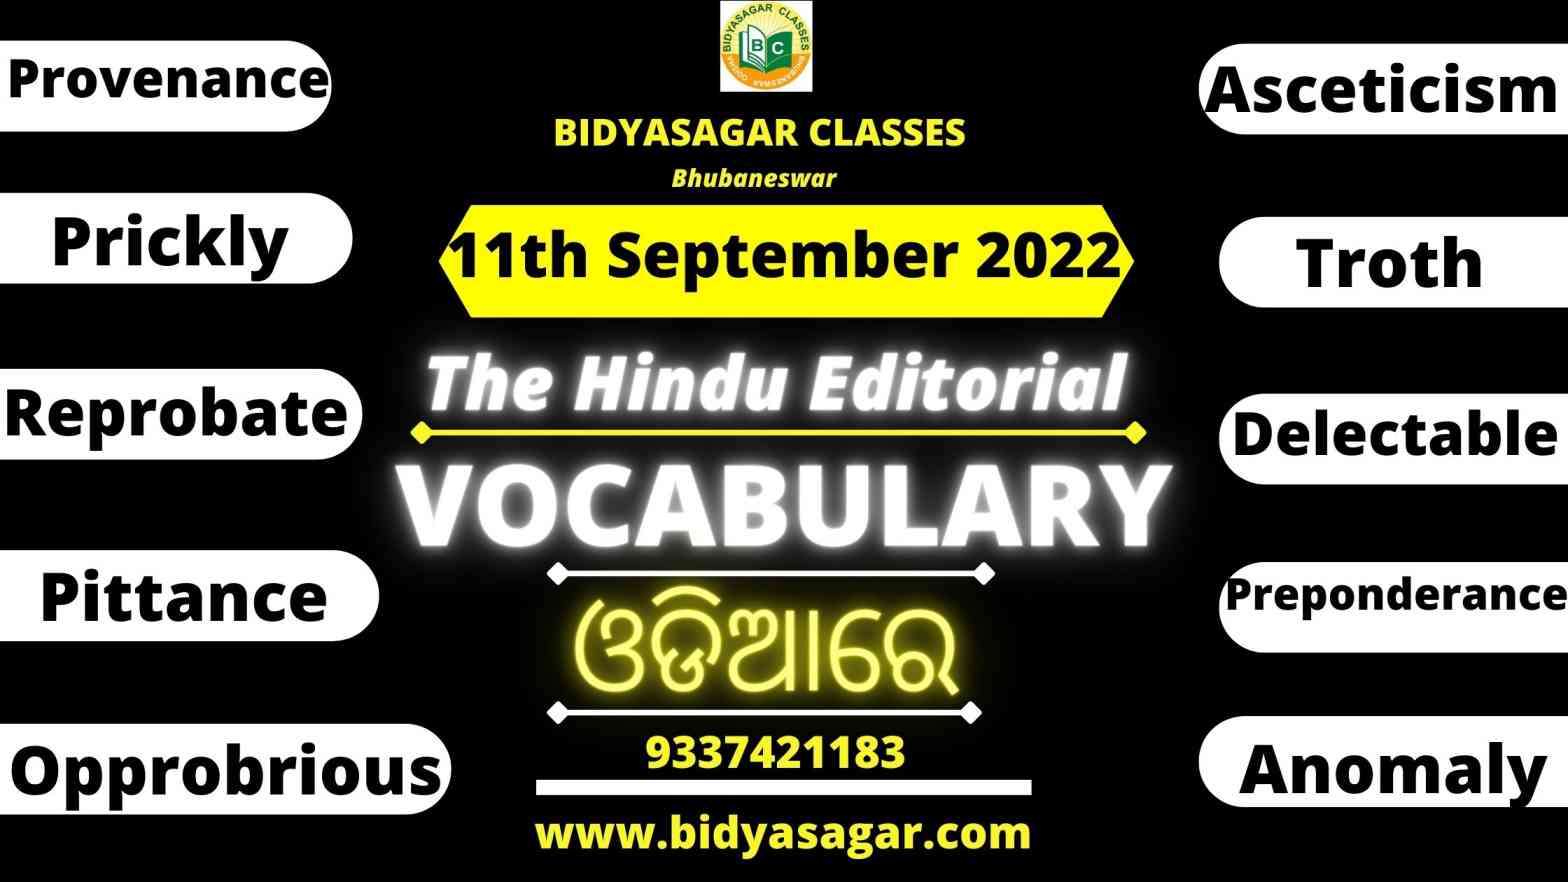 The Hindu Editorial Vocabulary of 11th September 2022